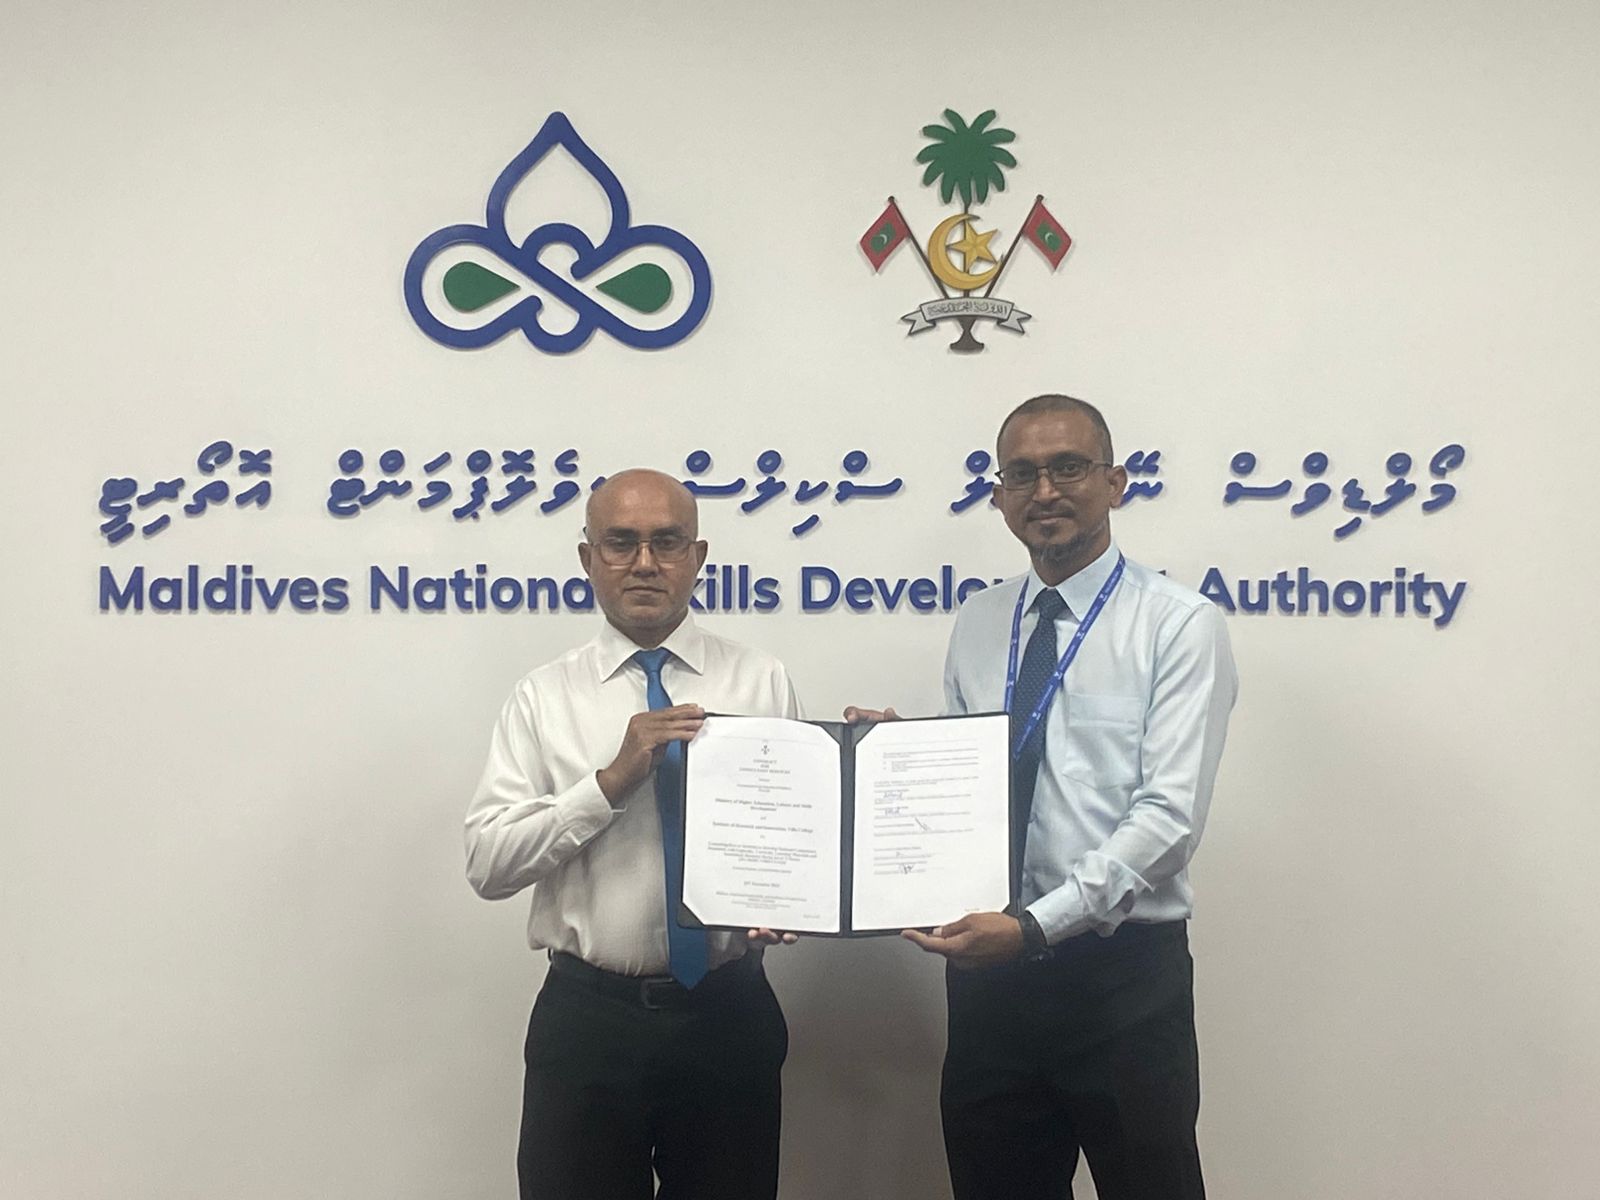 VILLA COLLEGE AWARDED THE CONTRACT TO DELIVER CONSULTANCY SERVICES TO DEVELOP NATIONAL COMPETENCY STANDARDS FOR THE INFORMATION AND COMMUNICATION TECHNOLOGY (ICT) SECTOR